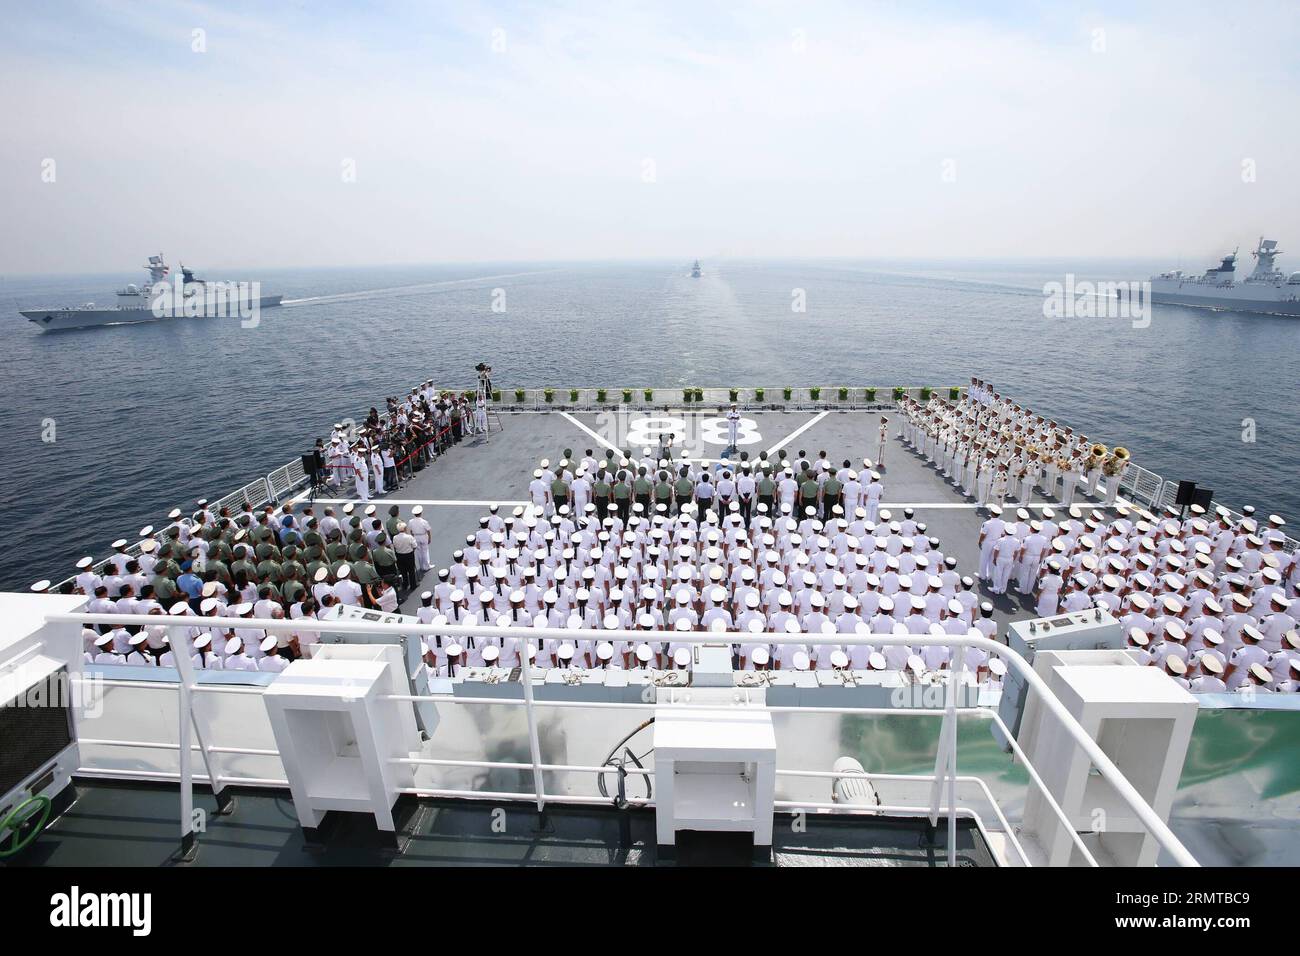 (140827) -- WEIHAI, Aug. 27, 2014 -- A ceremony is held to commemorate the 120th anniversary of the First Sino-Japanese War of 1894-1895 on a ship in a port of Weihai, east China s Shandong Province, Aug. 27, 2014. The People s Liberation Army (PLA) Navy on Wednesday held a memorial ceremony for the First Sino-Japanese War of 1894-1895, also known as the Jiawu War, in a Weihai port. ) (lfj) CHINA-SHANDONG-WEIHAI-SINO-JAPANESE WAR-MEMORIAL CEREMONY (CN) ZhaxChunming PUBLICATIONxNOTxINxCHN   Weihai Aug 27 2014 a Ceremony IS Hero to commemorate The  Anniversary of The First SINO Japanese was of 1 Stock Photo